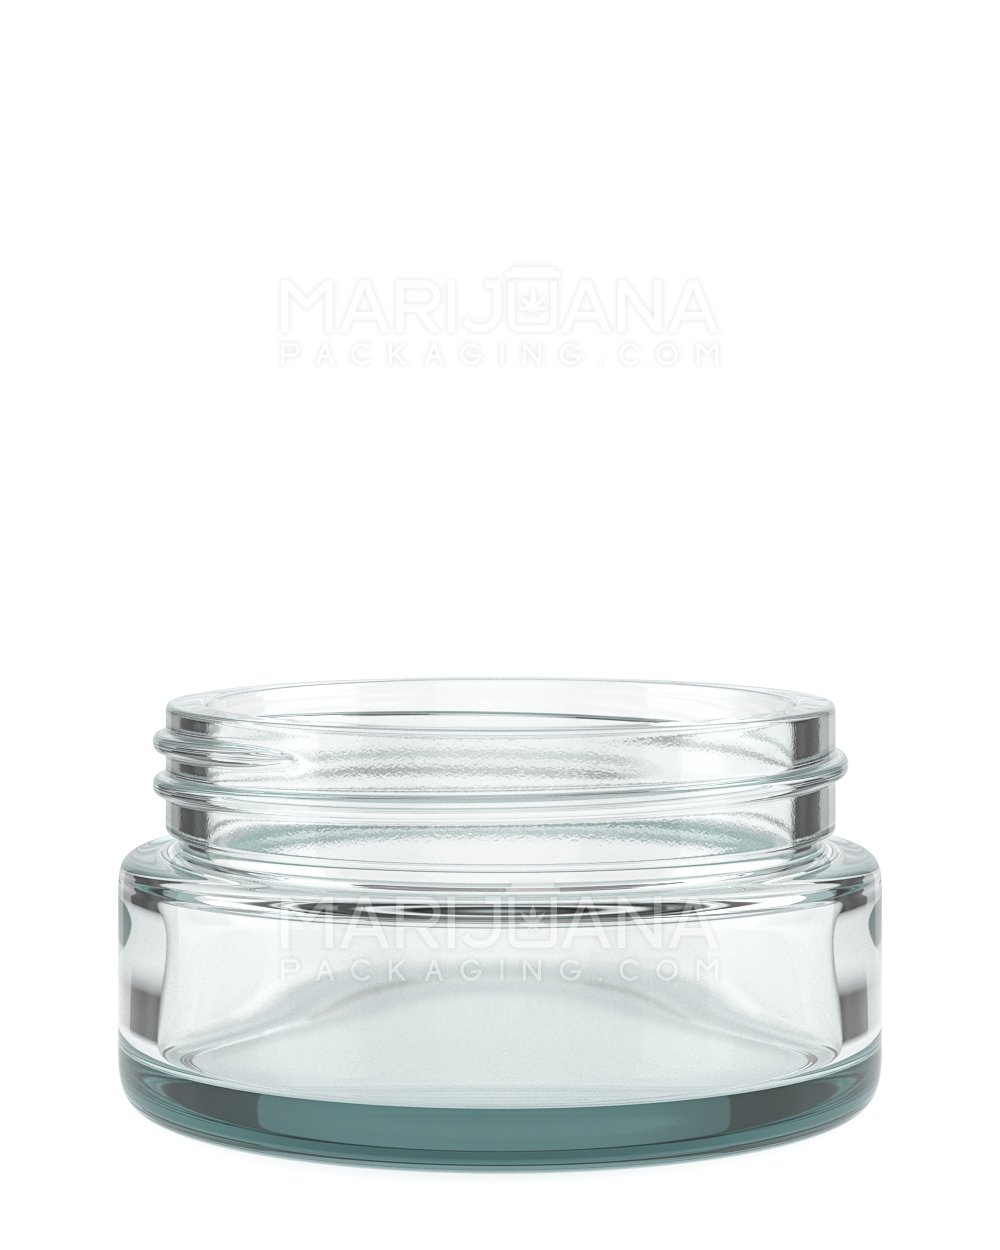 Straight Sided Clear Glass Jars | 63mm - 1.7oz - 96 Count - 1